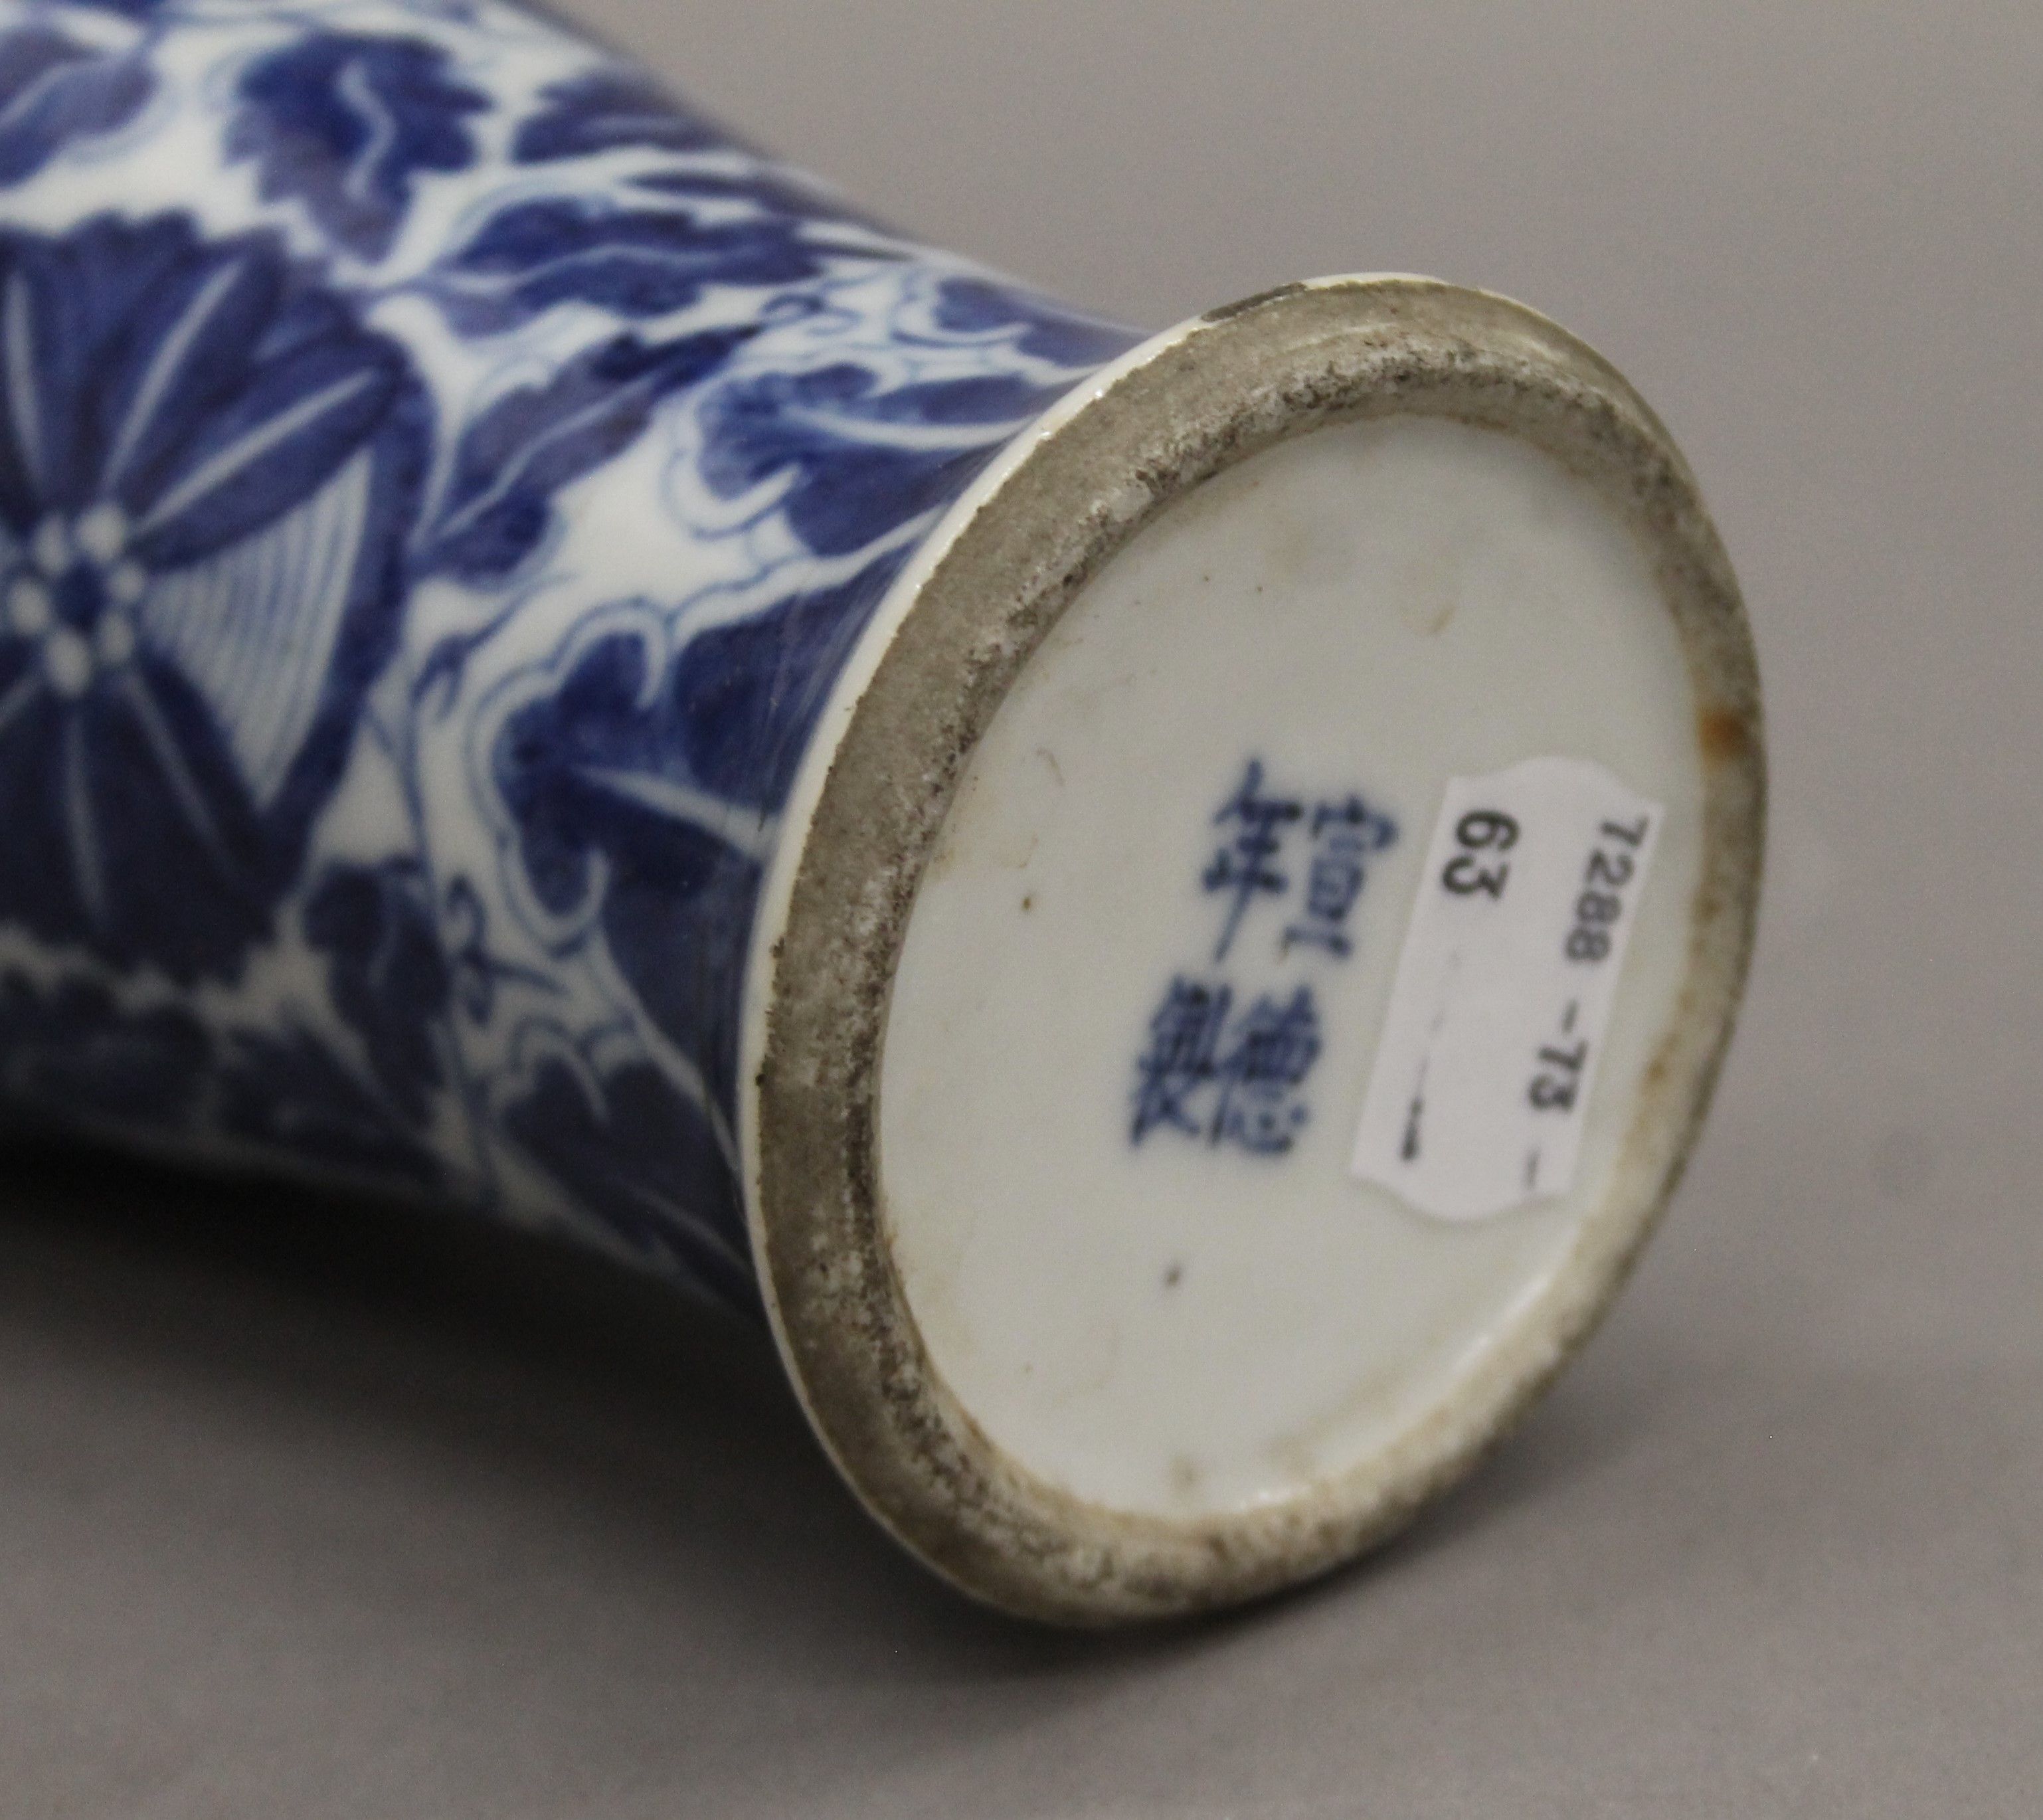 Two 19th century Chinese blue and white porcelain vases. The largest 22 cm high. - Image 10 of 10